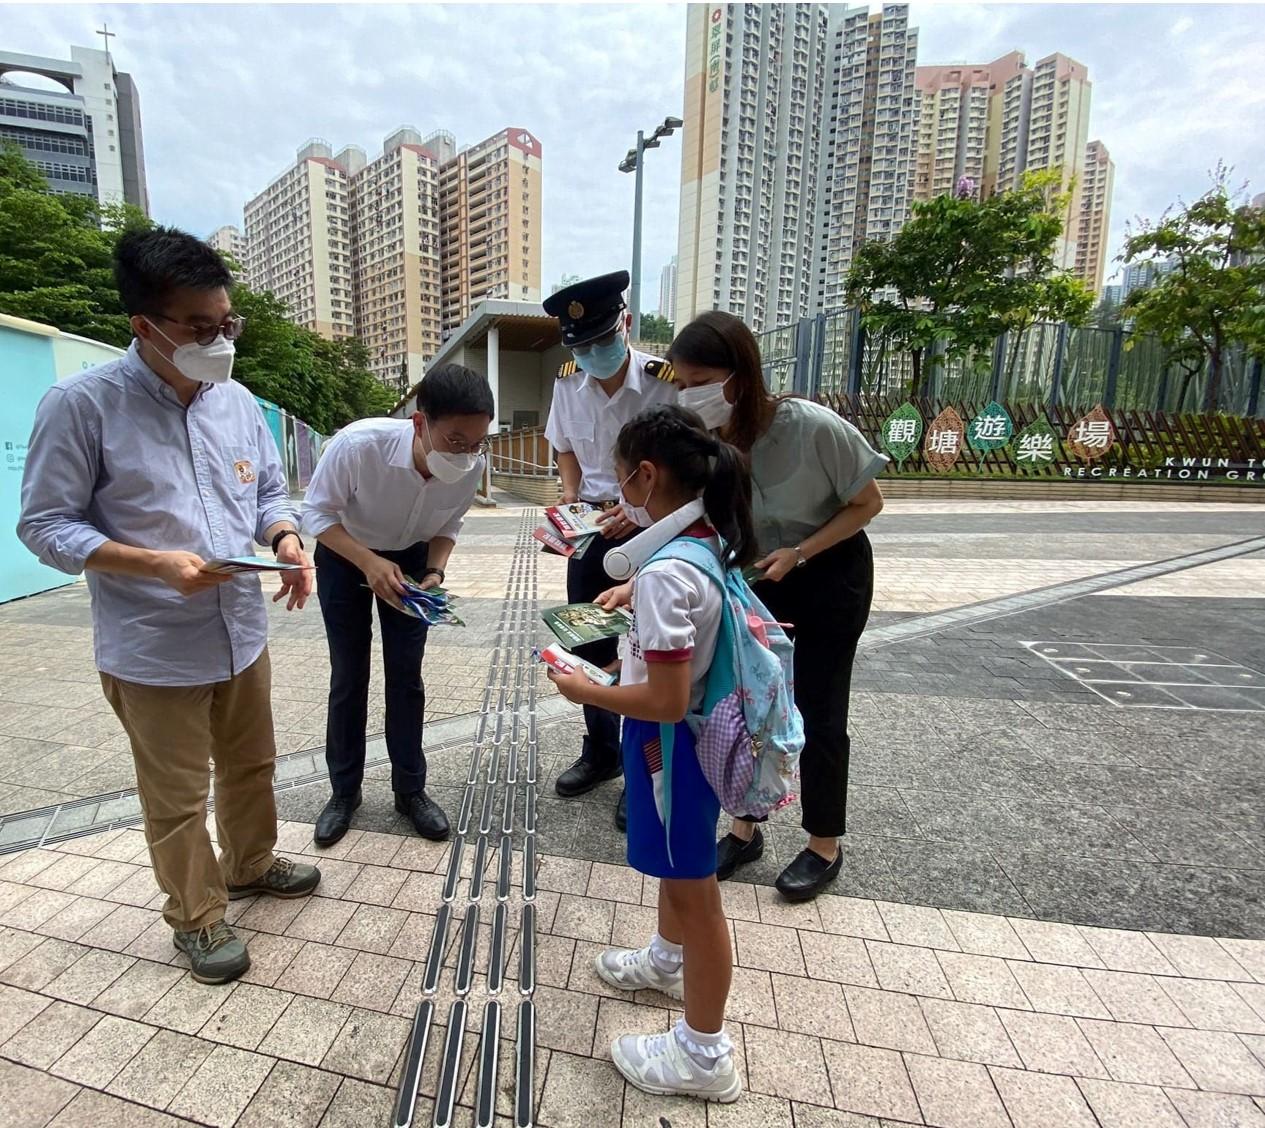 The Home Affairs Department and its District Offices conducted a series of cleaning works, publicity and educational activities during July and August to support the Government Programme on Tackling Hygiene Black Spots launched under the District Matters Co-ordination Task Force. Photo shows Kwun Tong District Office staff, together with local group volunteers, handing out mosquito repellent bags and leaflets to residents for promotion of mosquito and rodent control.